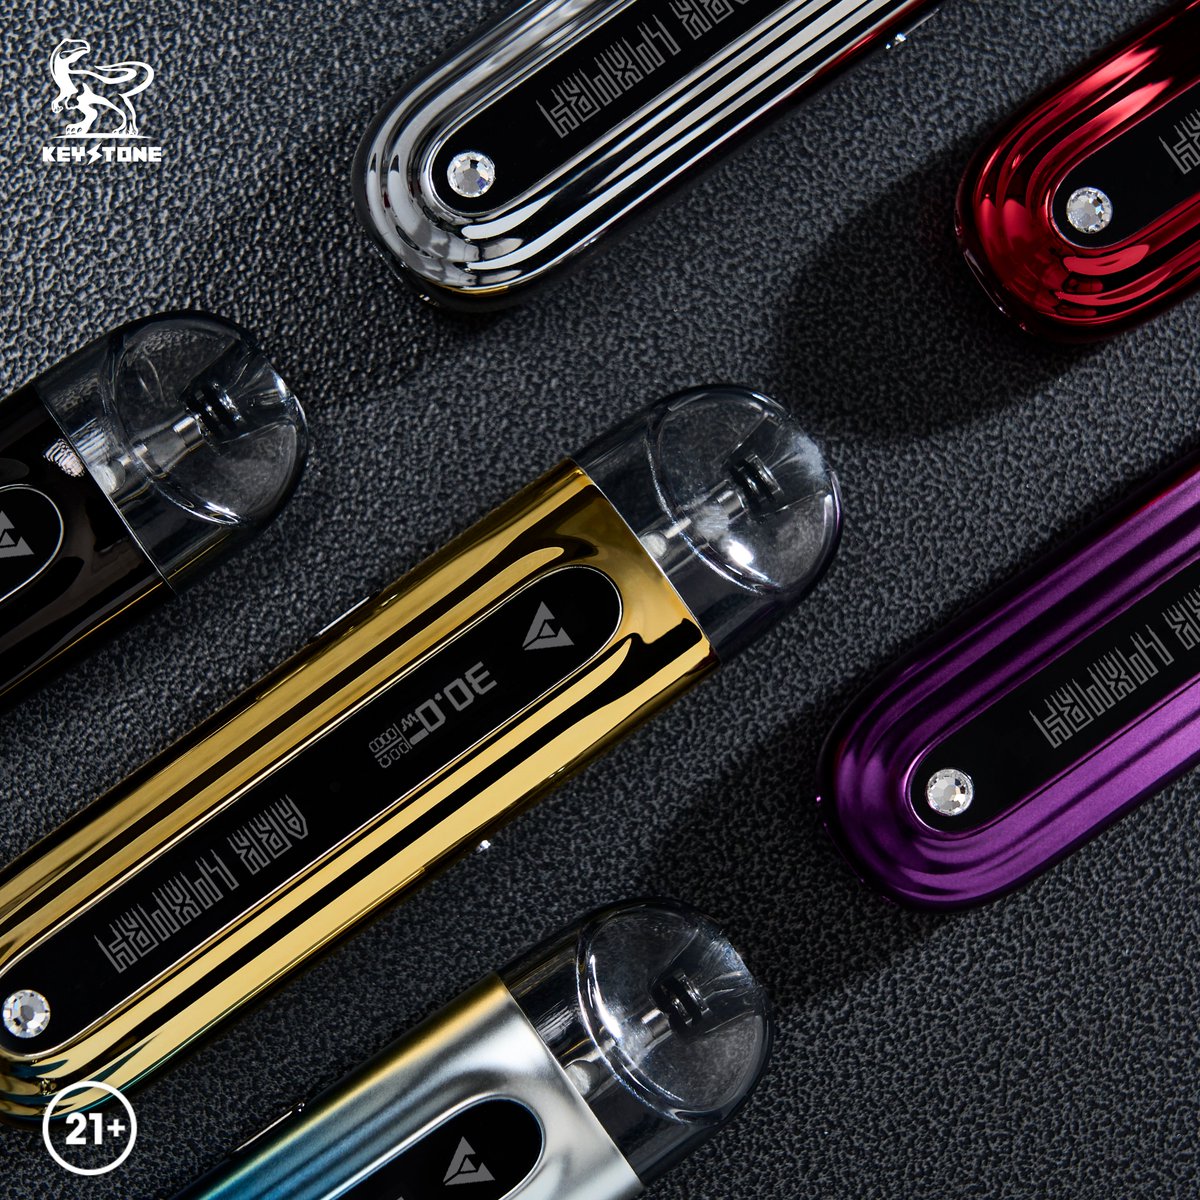 🌟 The Ark Luxury refillable vape: Your award-winning, stylish sidekick.
🔄 Smart tech meets smooth taste—auto-tuned power for the perfect puff.
💪 All-day battery. All-weekend vibes.
#vape #vapesupplier #pod #refillablevape #vapepod #Keystone #refillablepod #podsystem #vaping